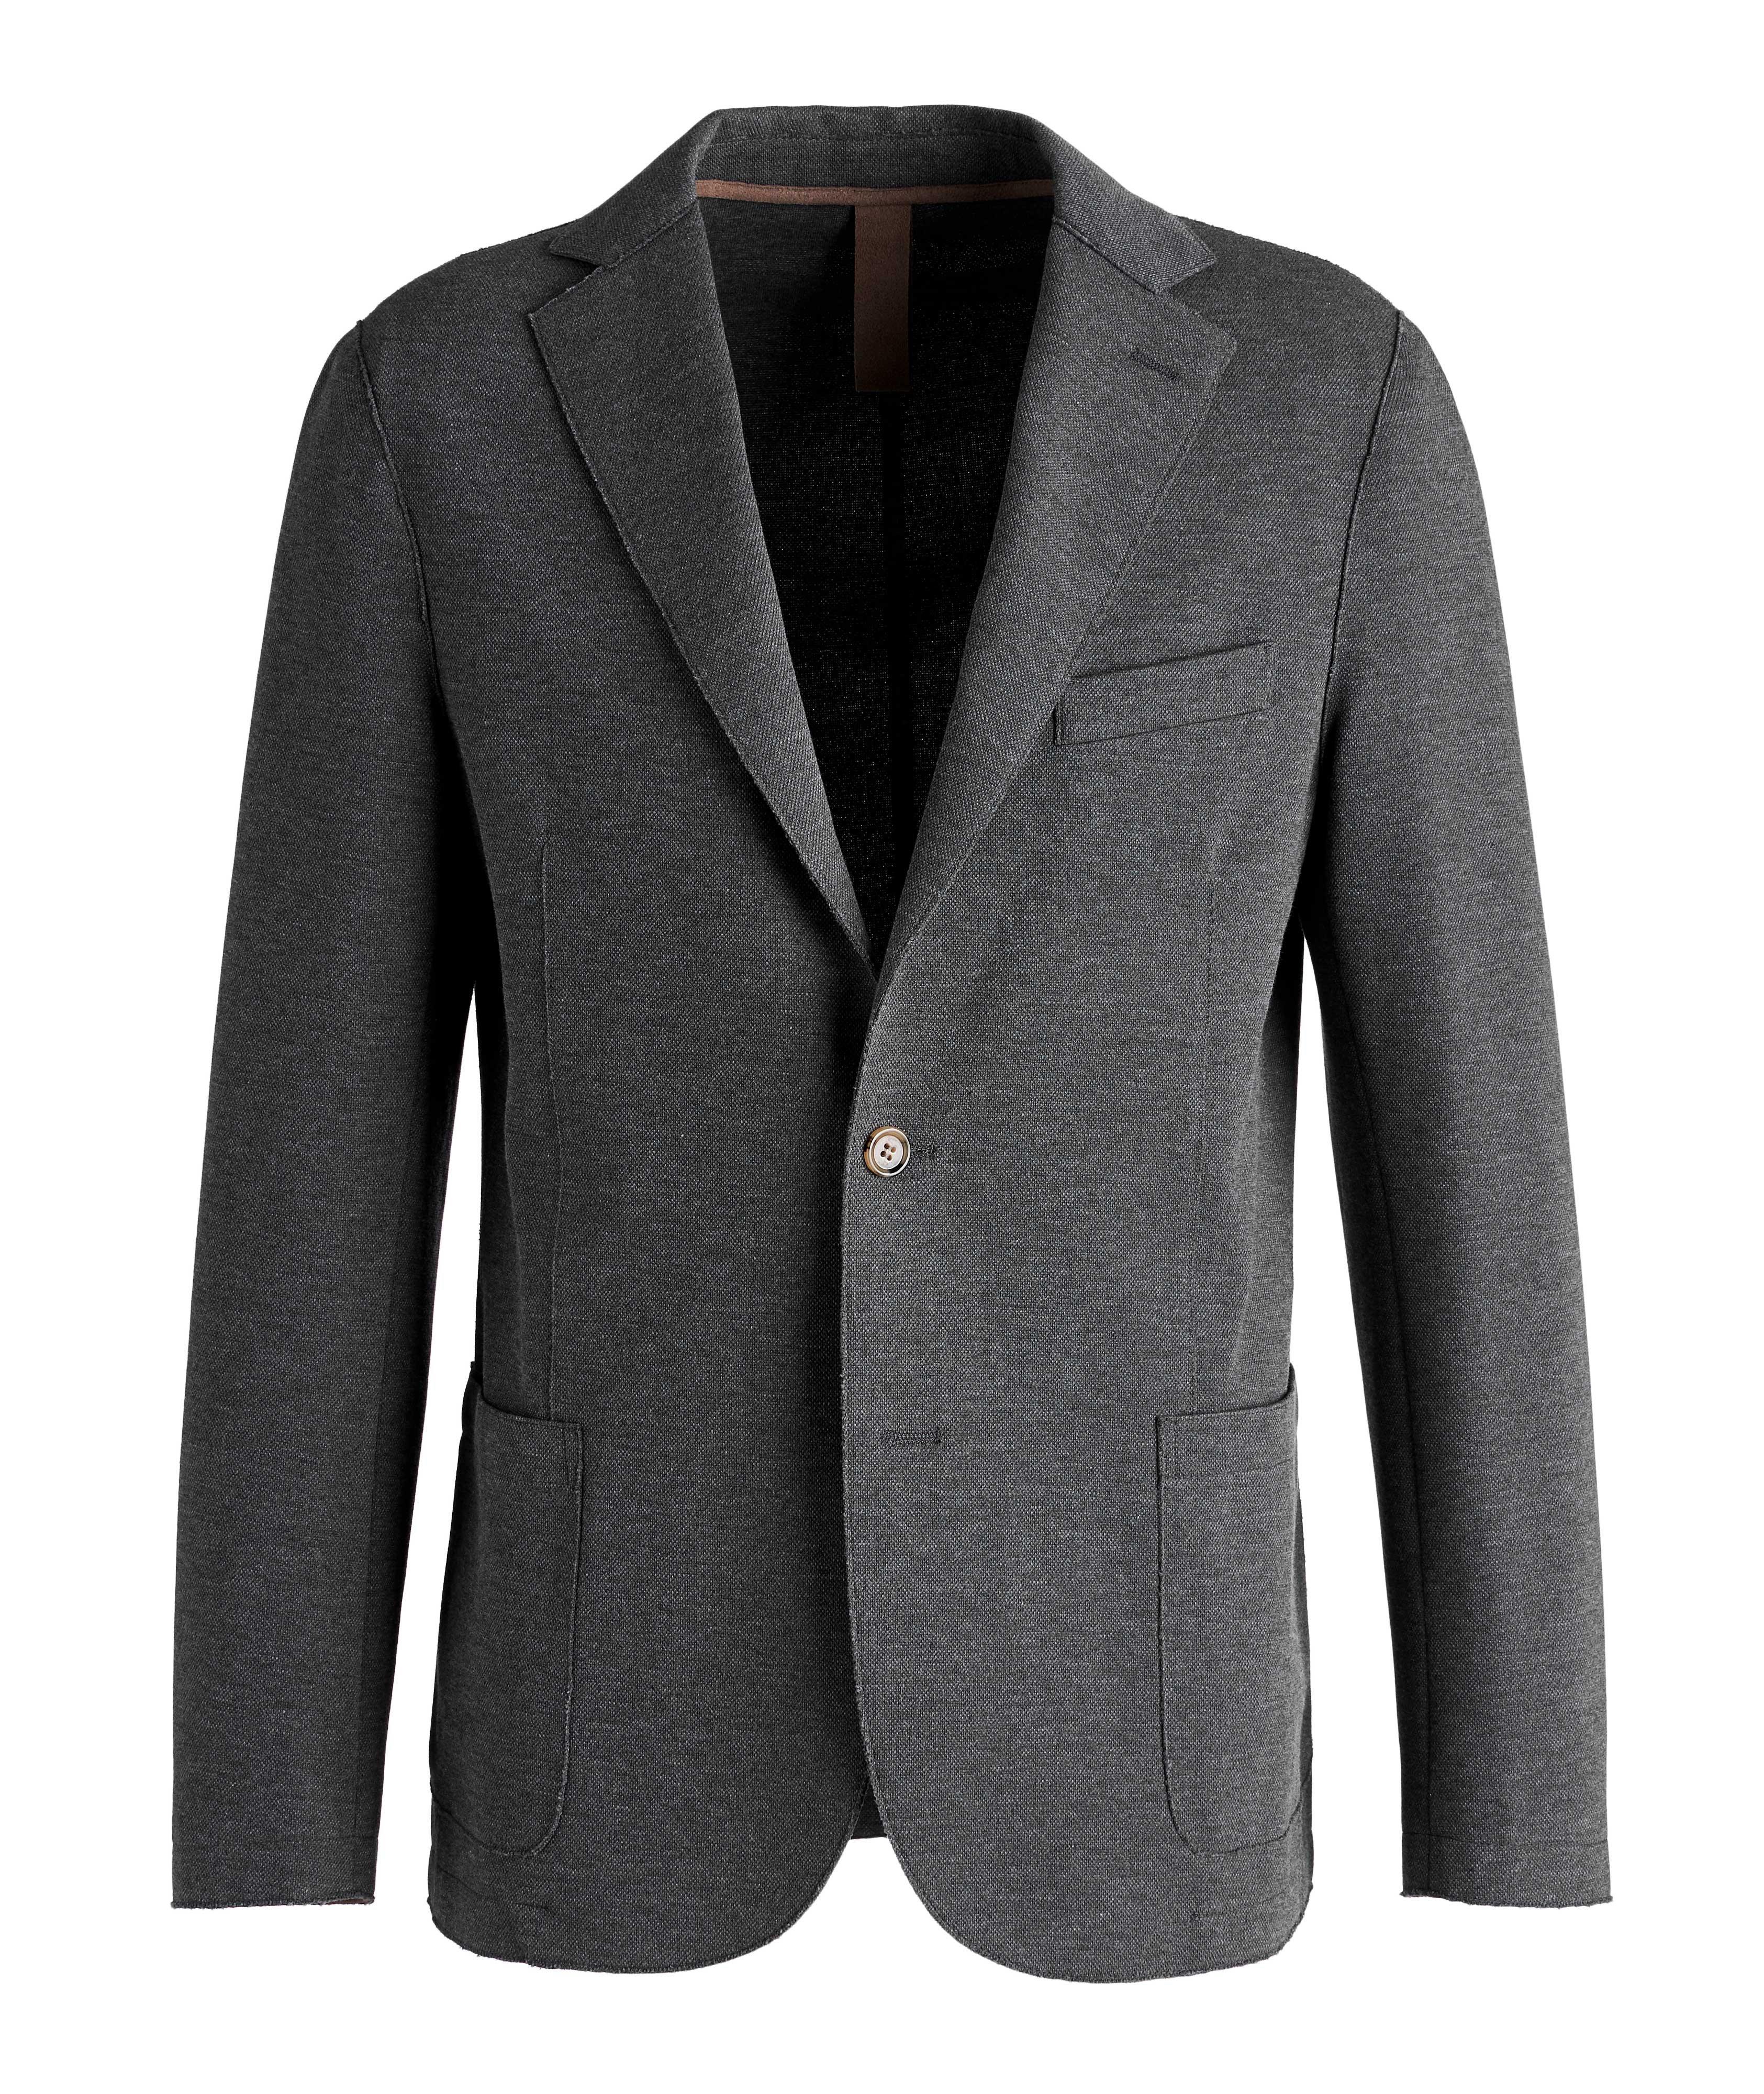 Unconstructed Stretch Sports Jacket image 0